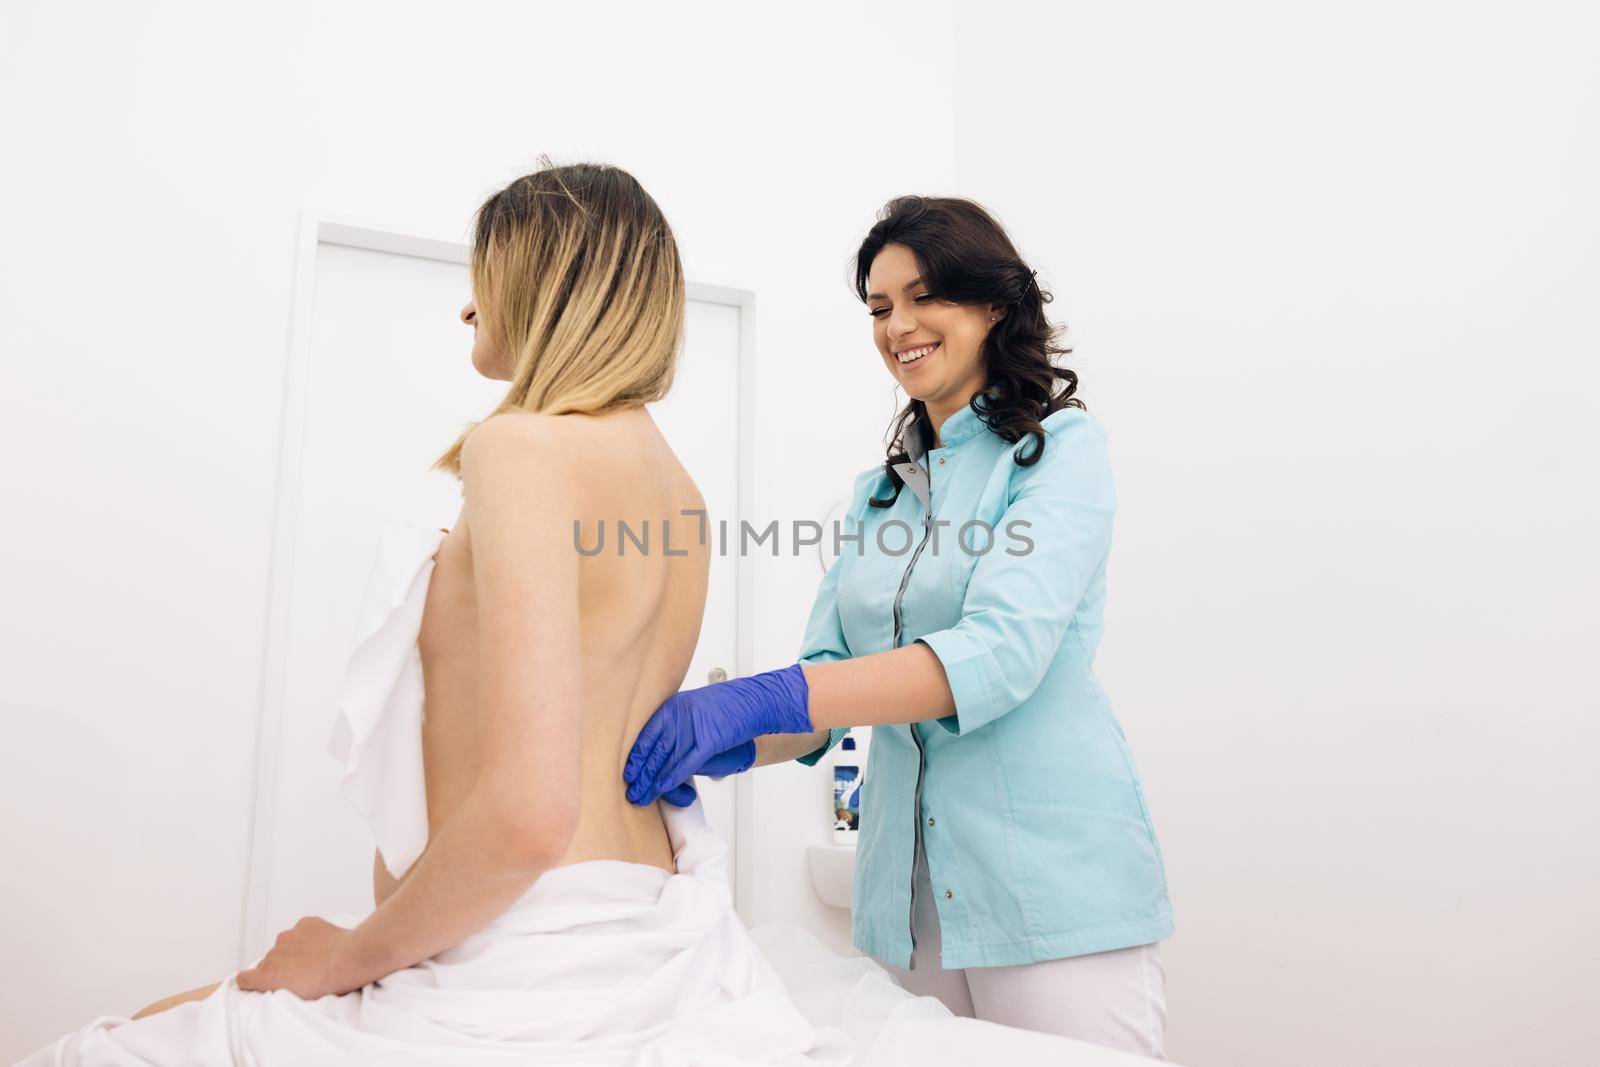 Girl receives a physiotherapy massage during a session. Alternative medicine treatment and rehabilitation of patients. The chiropractor regulates the patient's shoulder by uflypro